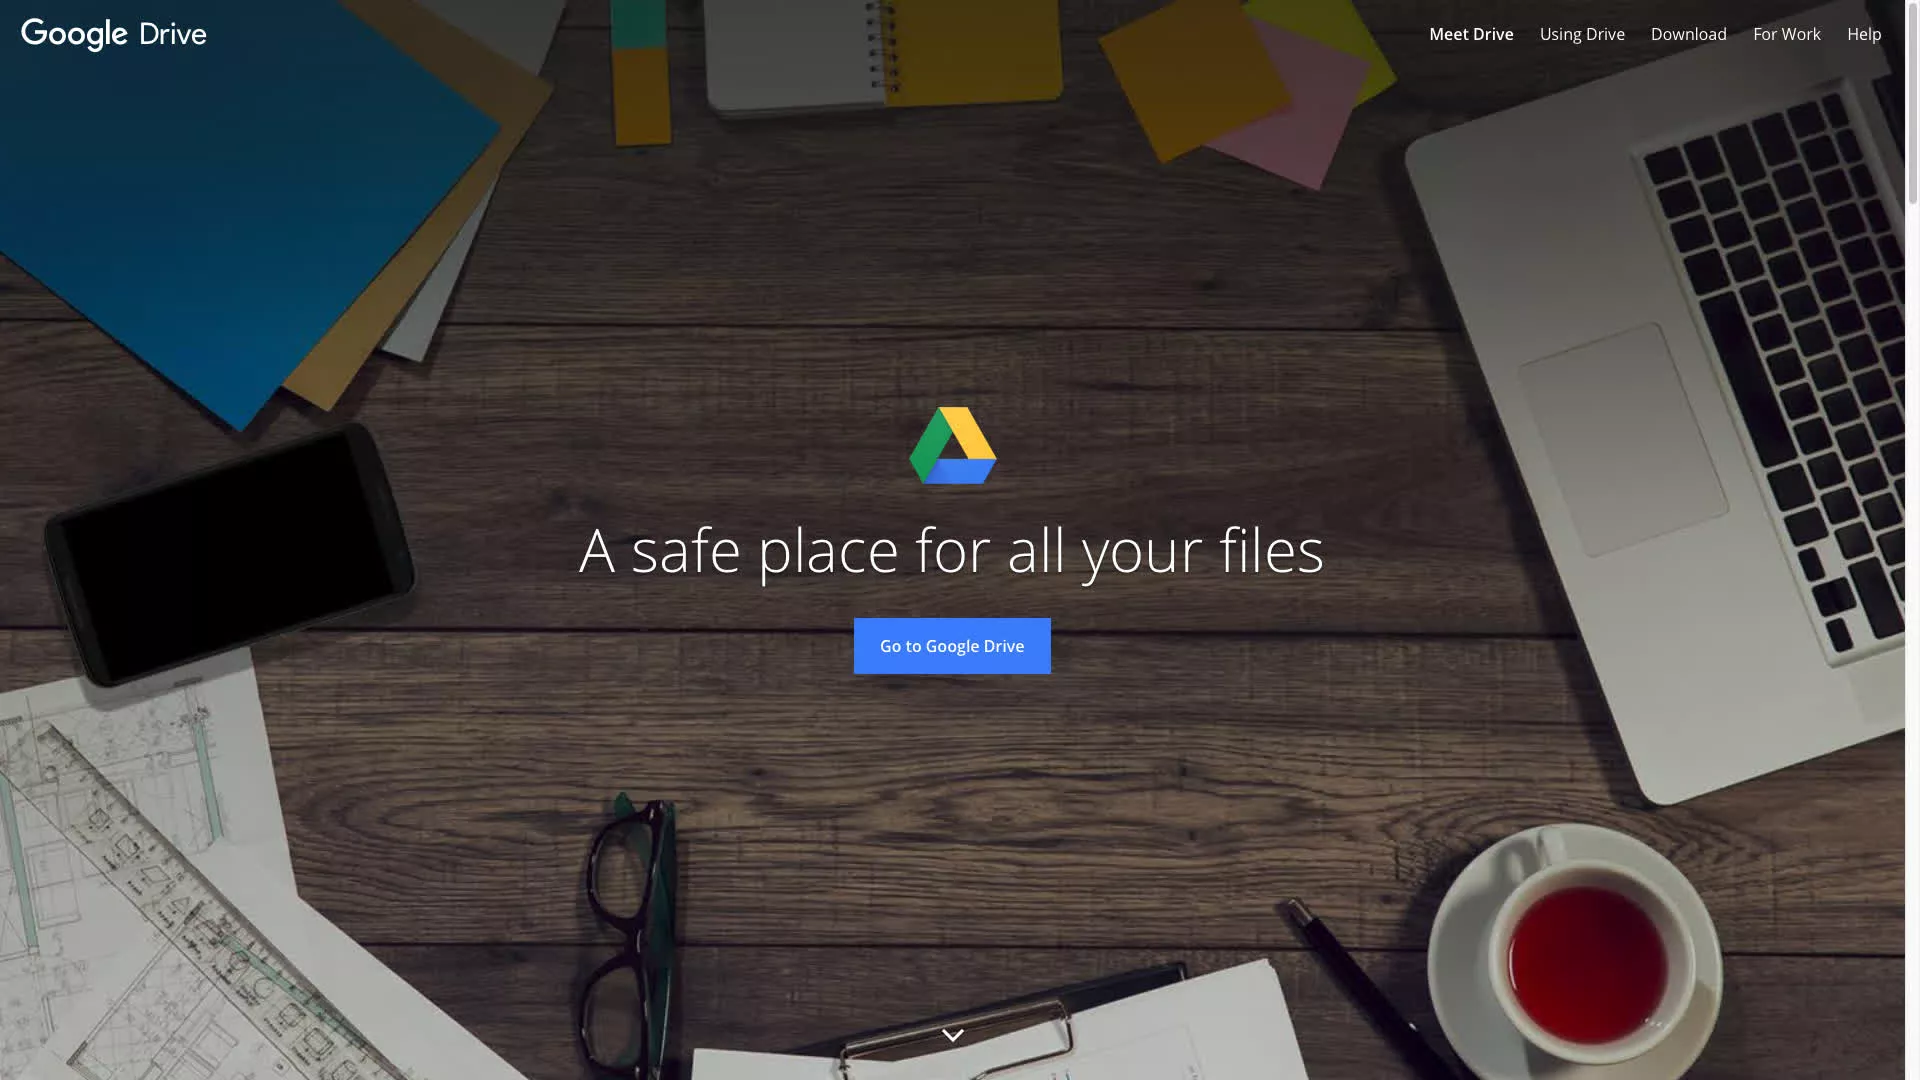 Google Drive users report losing files from the last few months